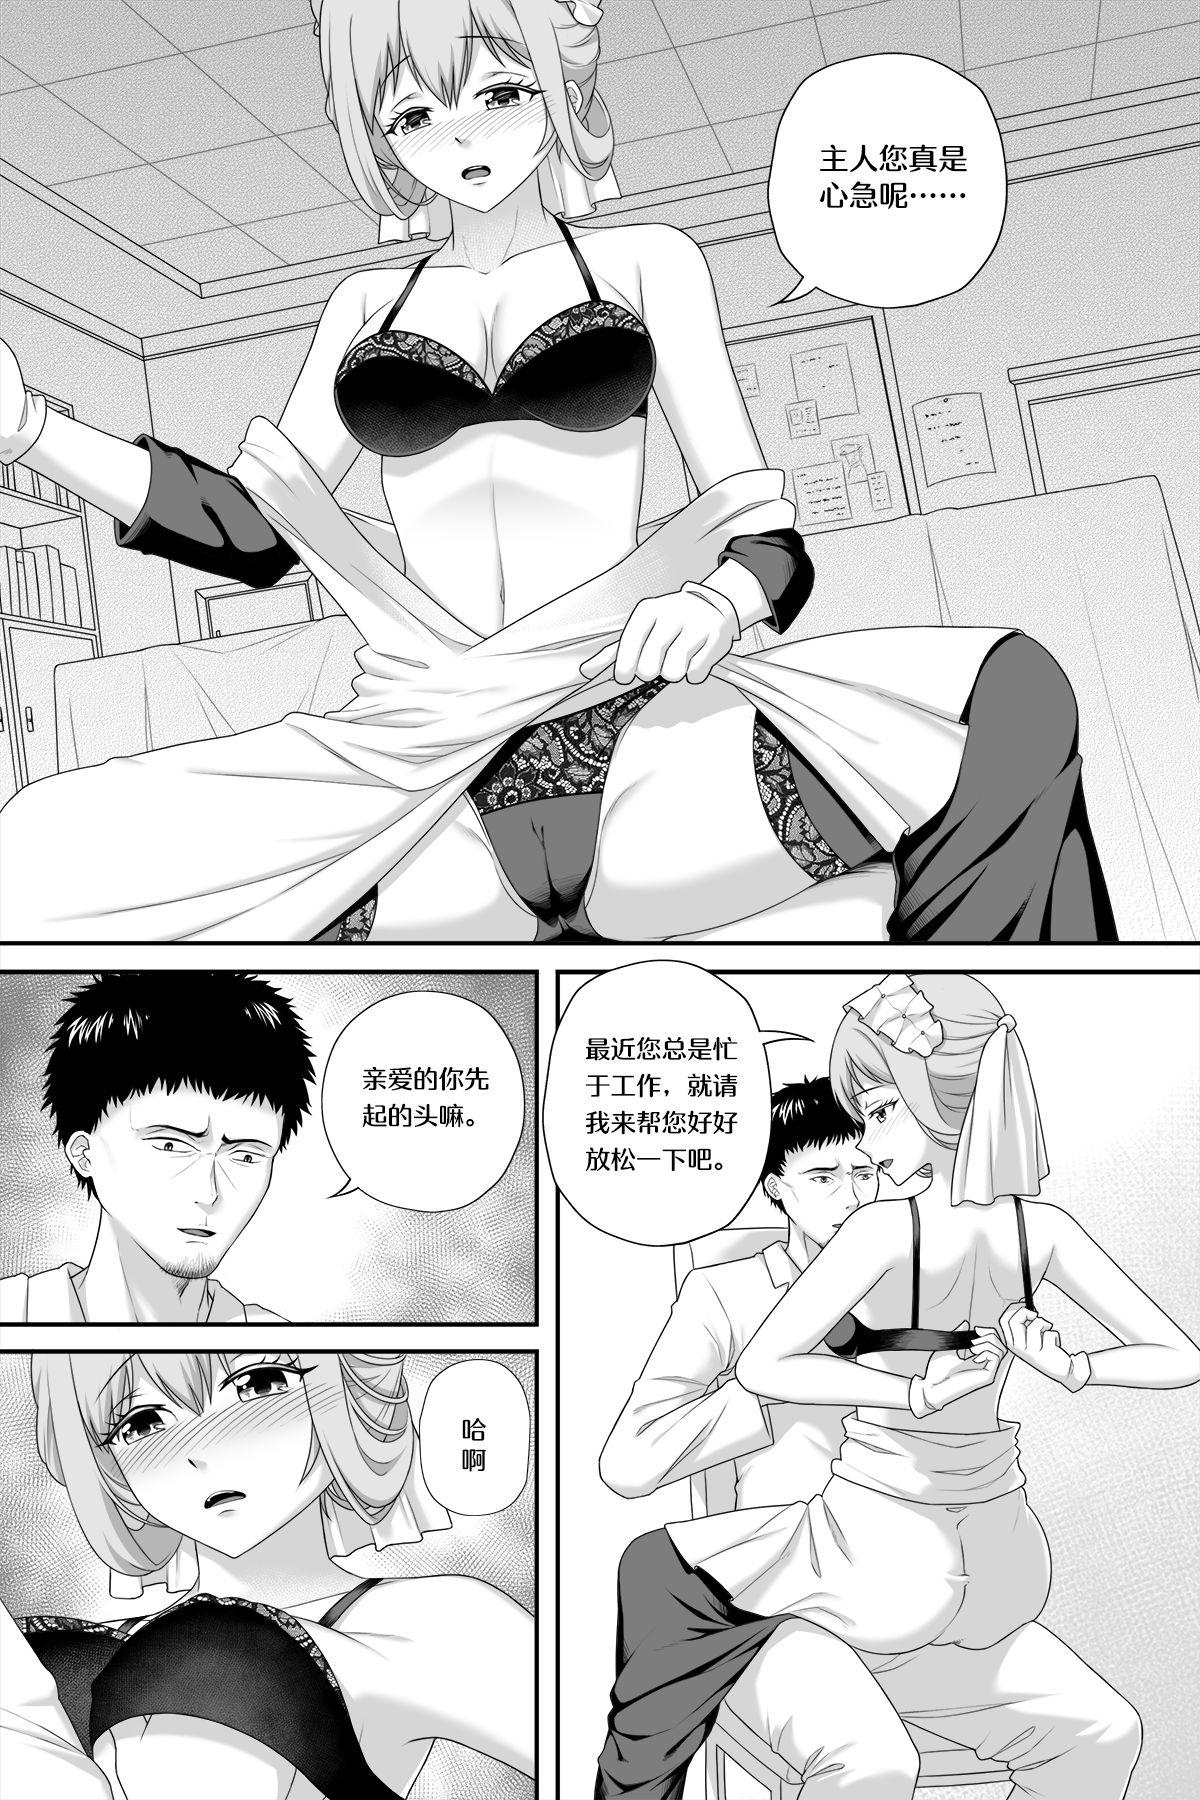 Beauty 花女仆的侍奉 - Warship girls Double - Page 4